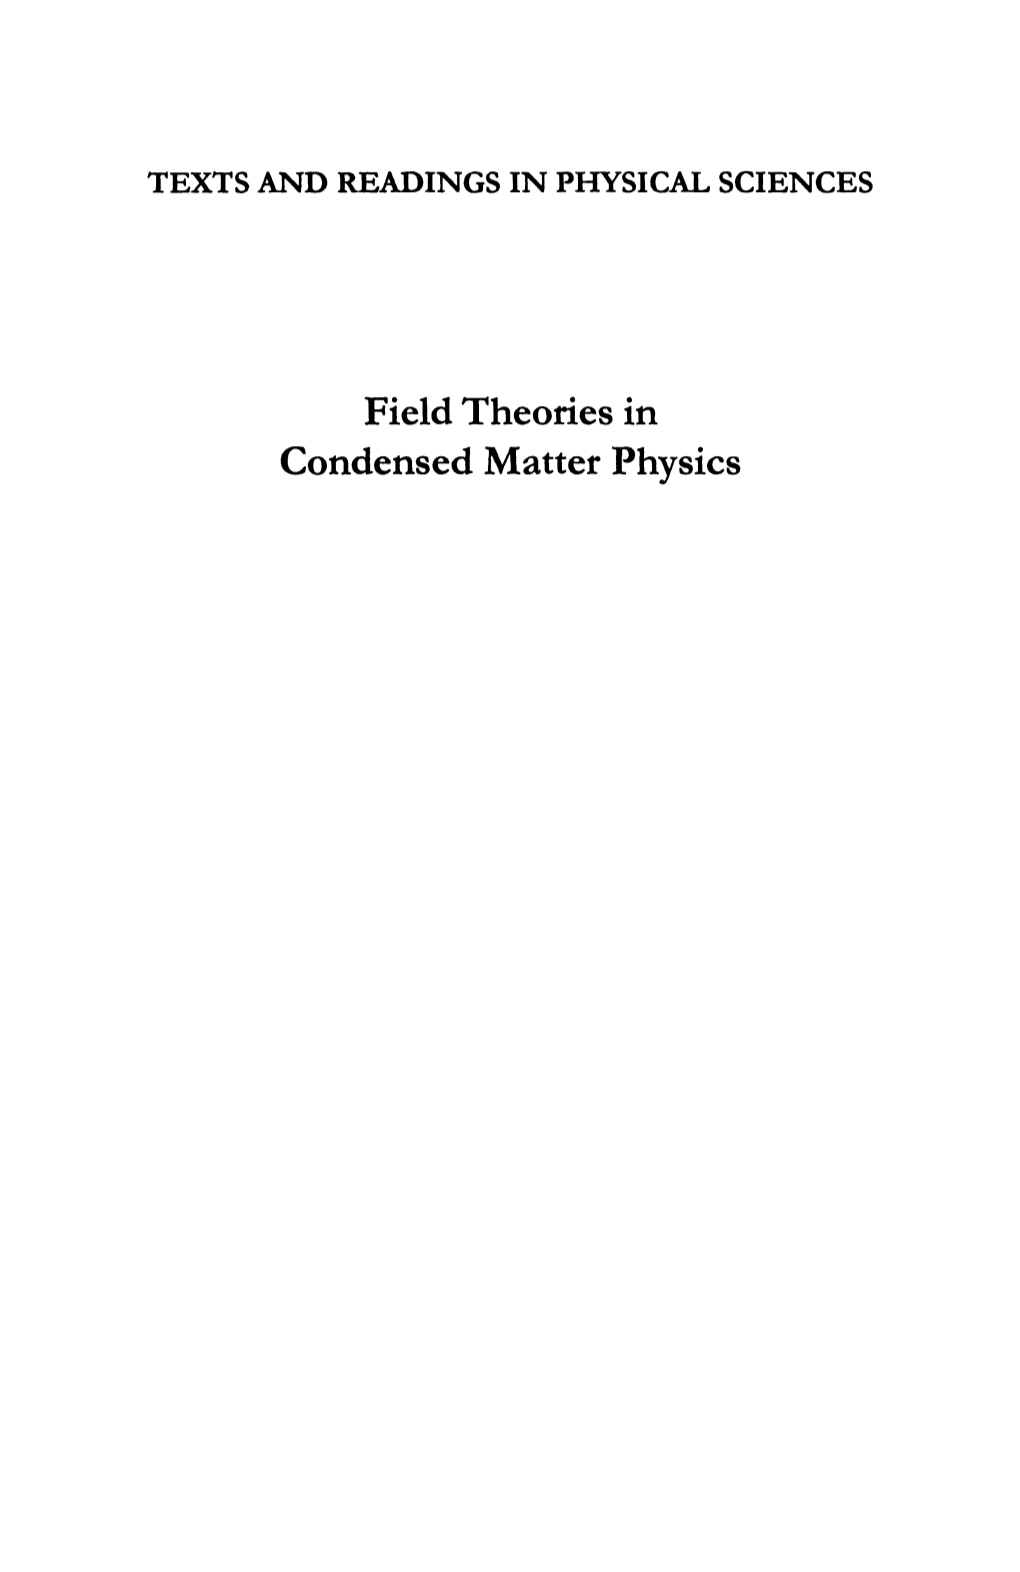 Field Theories in Condensed Matter Physics Texts and Readings in Physical Sciences